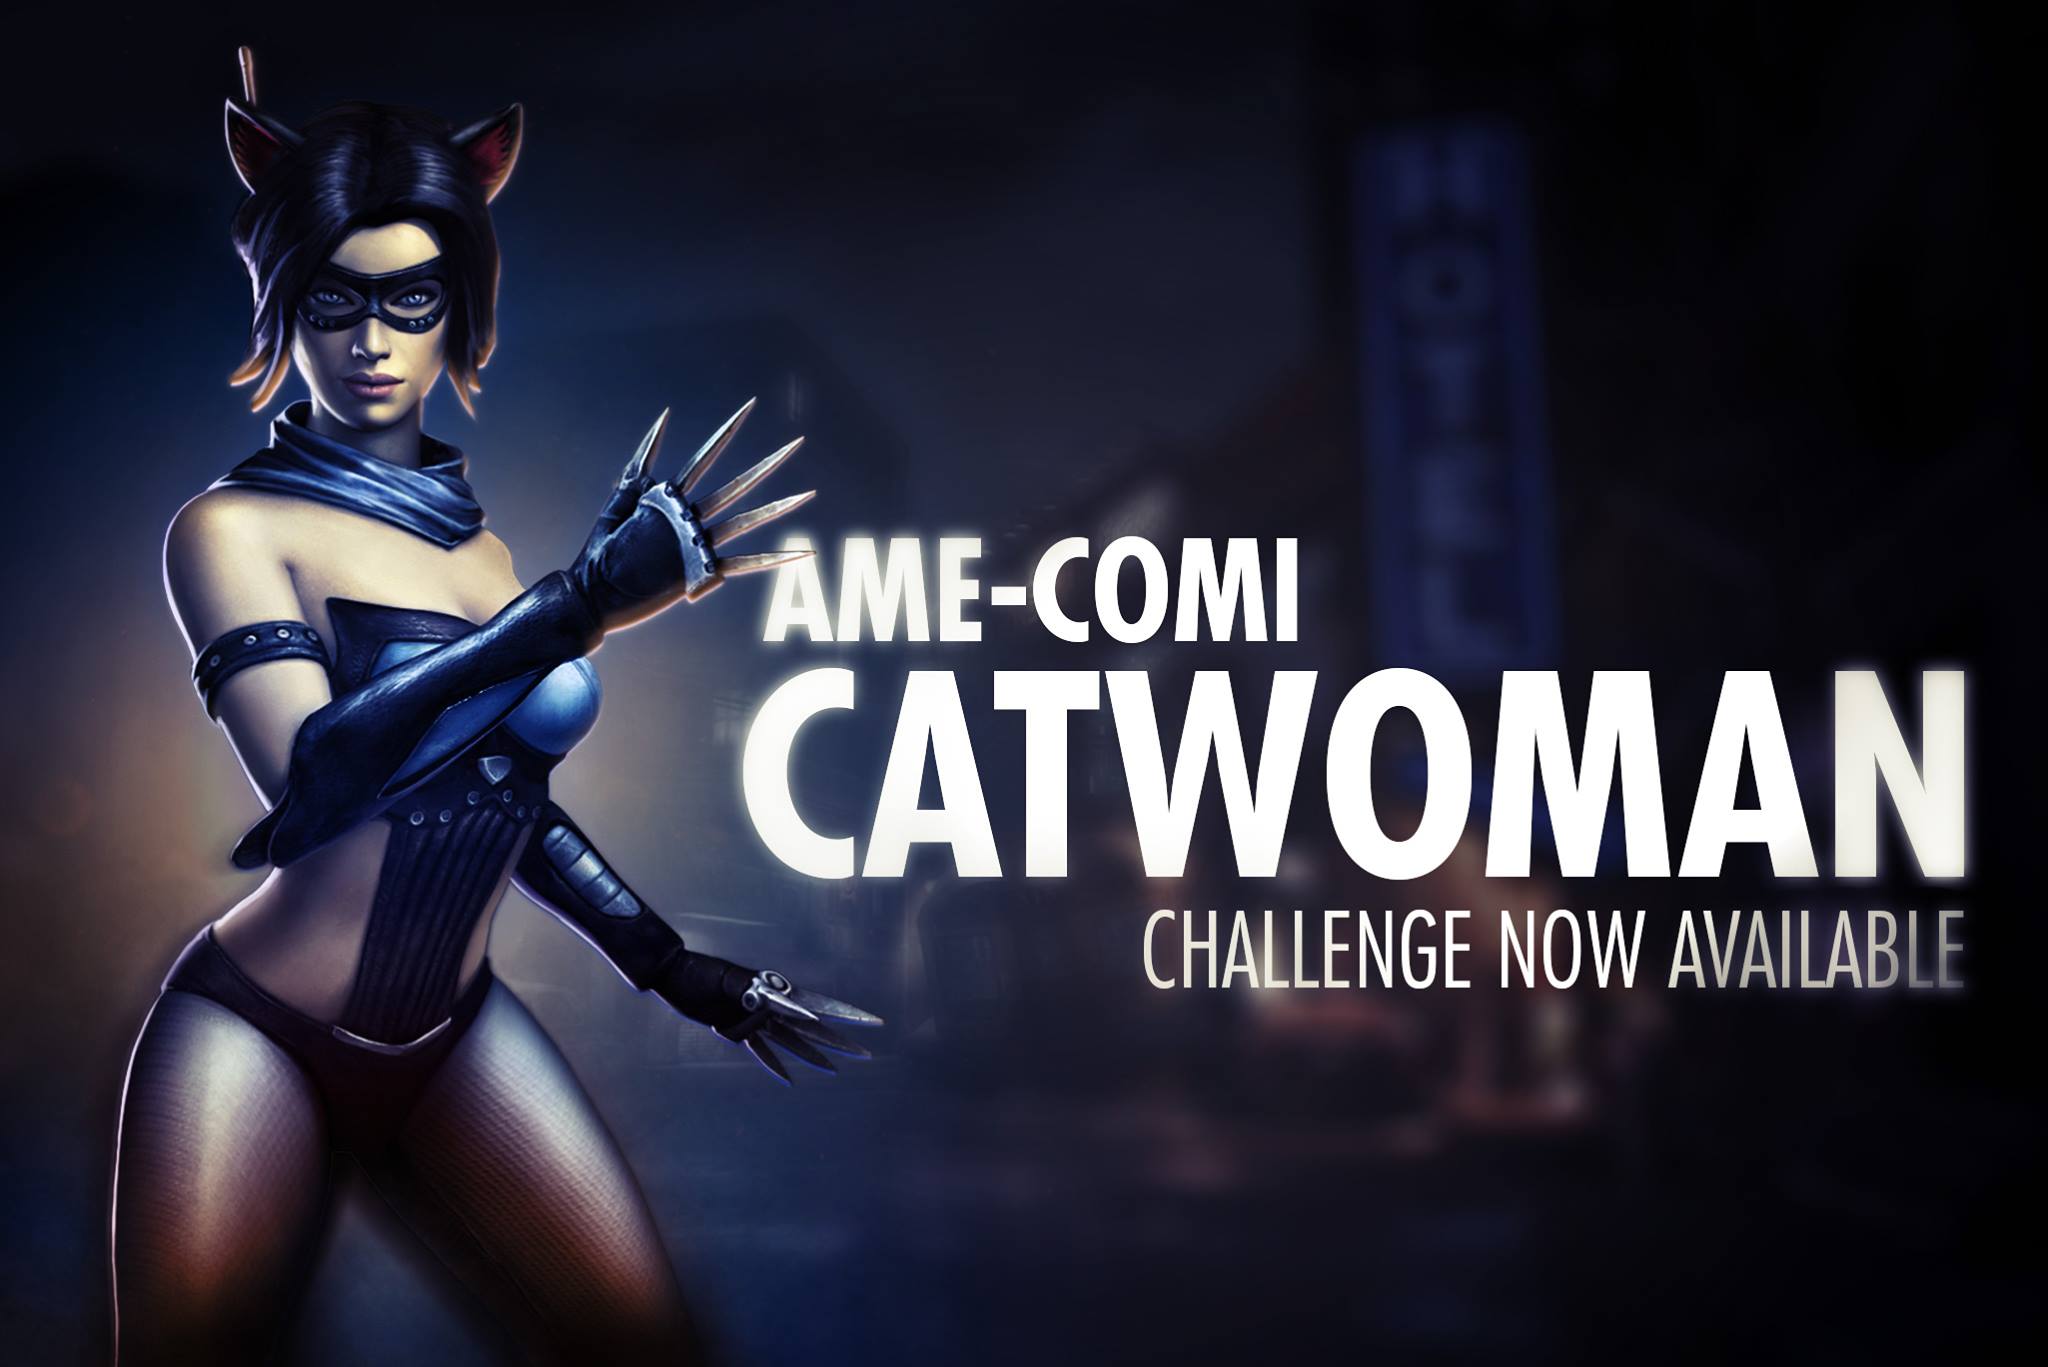 Ame-Comi Catwoman Challenge For Injustice Mobile.